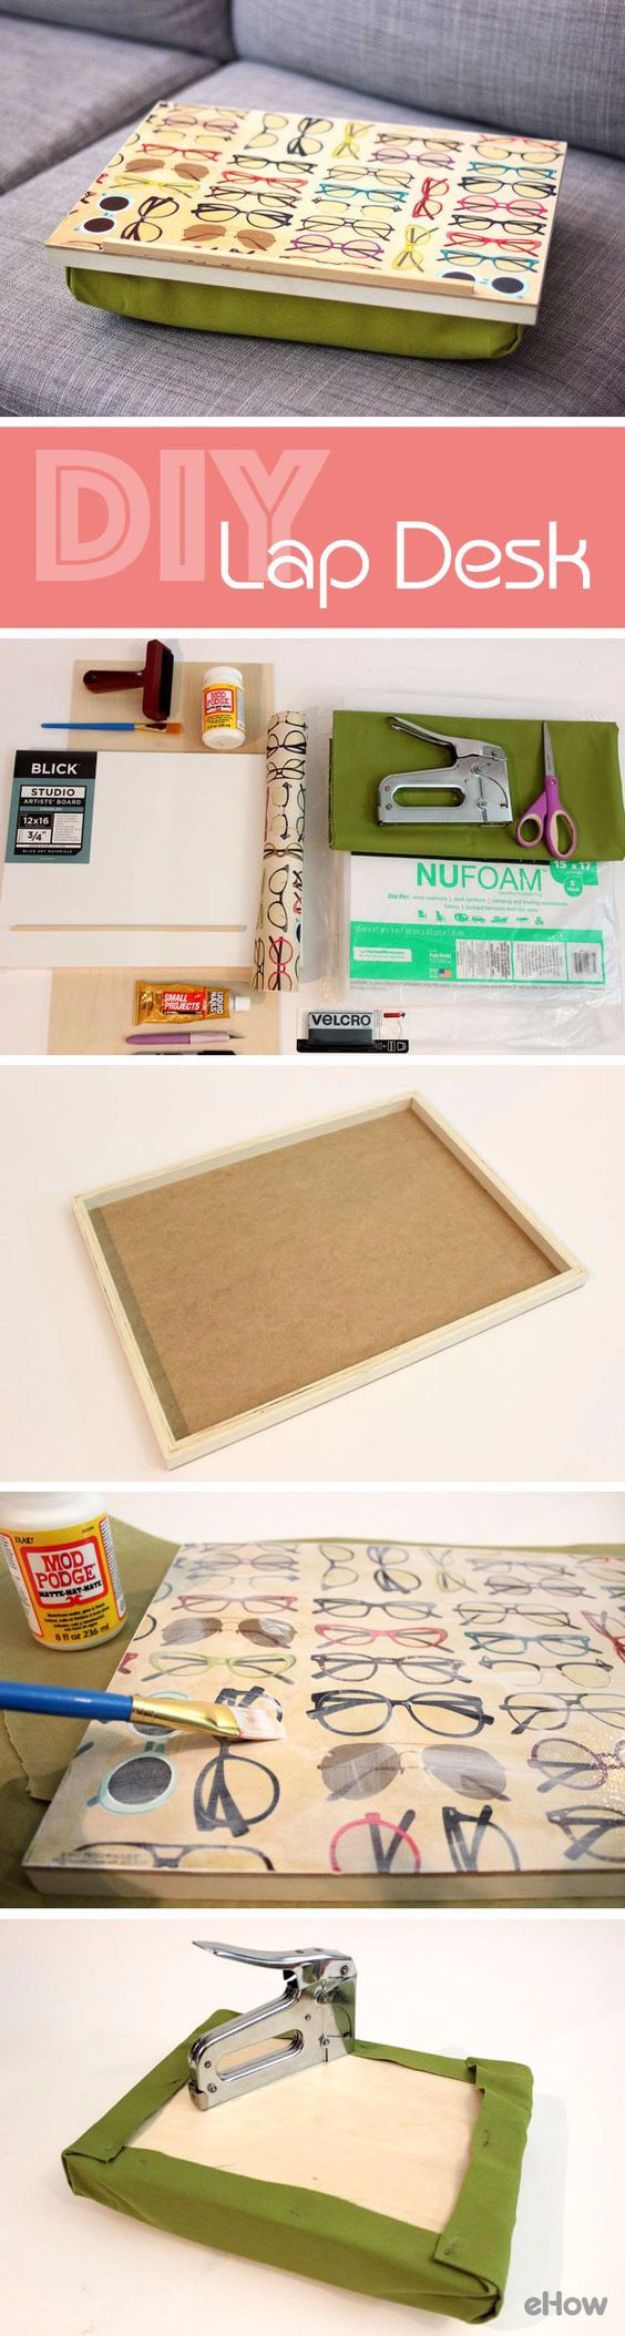 DIY School Supplies - Make a Pillow Lap Desk - Easy Crafts and Do It Yourself Ideas for Back To School - Pencils, Notebooks, Backpacks and Fun Gear for Going Back To Class - Creative DIY Projects for Cheap School Supplies - Cute Crafts for Teens and Kids #backtoschool #teencrafts #kidscrafts #teen #diyideas #crafts